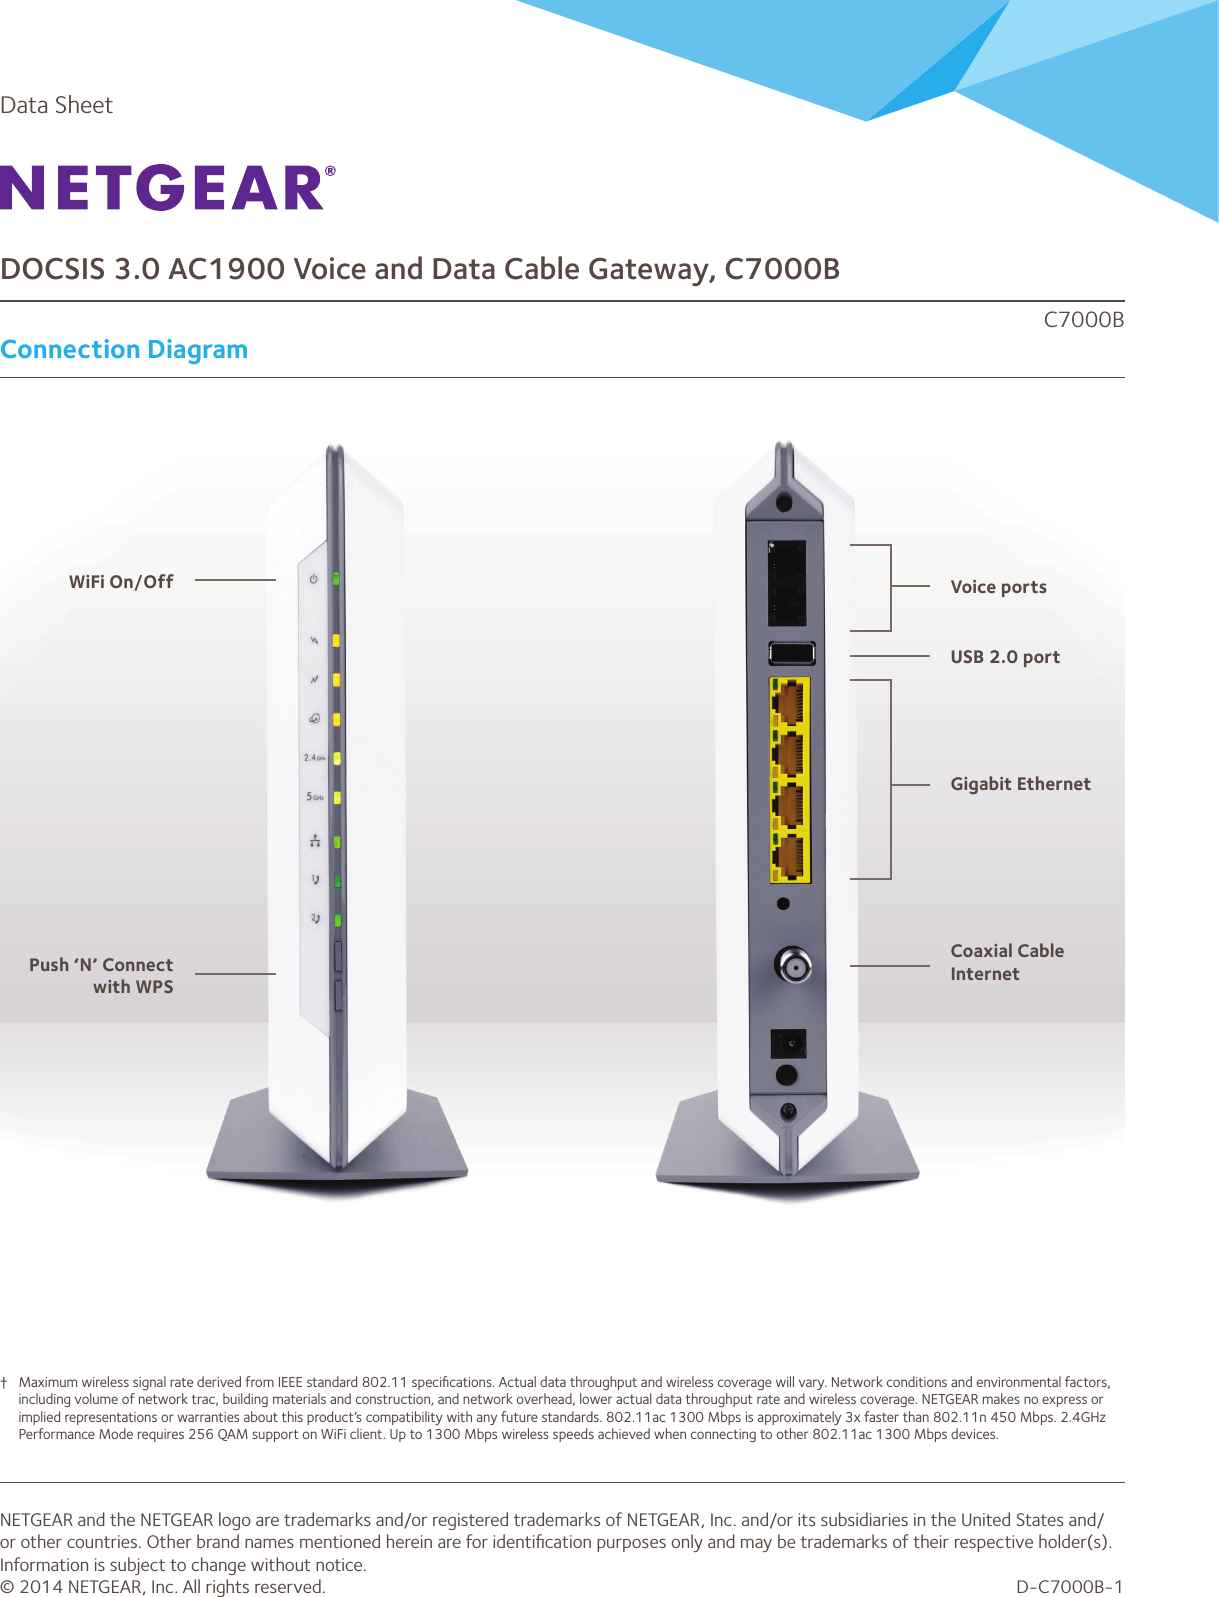 Data SheetDOCSIS 3.0 AC1900 Voice and Data Cable Gateway, C7000BC7000BConnection DiagramNETGEAR and the NETGEAR logo are trademarks and/or registered trademarks of NETGEAR, Inc. and/or its subsidiaries in the United States and/or other countries. Other brand names mentioned herein are for identiﬁcation purposes only and may be trademarks of their respective holder(s). Information is subject to change without notice.© 2014 NETGEAR, Inc. All rights reserved. D-C7000B-1Push ‘N’ Connect with WPSWiFi On/Off Voice portsUSB 2.0 portGigabit EthernetCoaxial Cable Internet†  Maximum wireless signal rate derived from IEEE standard 802.11 speciﬁcations. Actual data throughput and wireless coverage will vary. Network conditions and environmental factors, including volume of network trac, building materials and construction, and network overhead, lower actual data throughput rate and wireless coverage. NETGEAR makes no express or implied representations or warranties about this product’s compatibility with any future standards. 802.11ac 1300 Mbps is approximately 3x faster than 802.11n 450 Mbps. 2.4GHz Performance Mode requires 256 QAM support on WiFi client. Up to 1300 Mbps wireless speeds achieved when connecting to other 802.11ac 1300 Mbps devices.